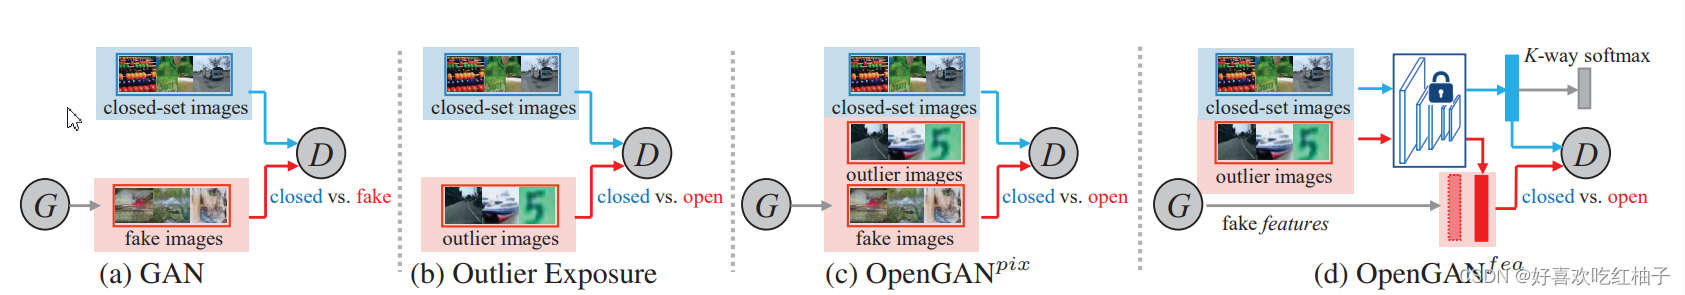 【<span style='color:red;'>开放</span>集检测】OpenGAN: <span style='color:red;'>Open</span>-Set Recognition via <span style='color:red;'>Open</span> Data Generation 论文<span style='color:red;'>阅读</span>